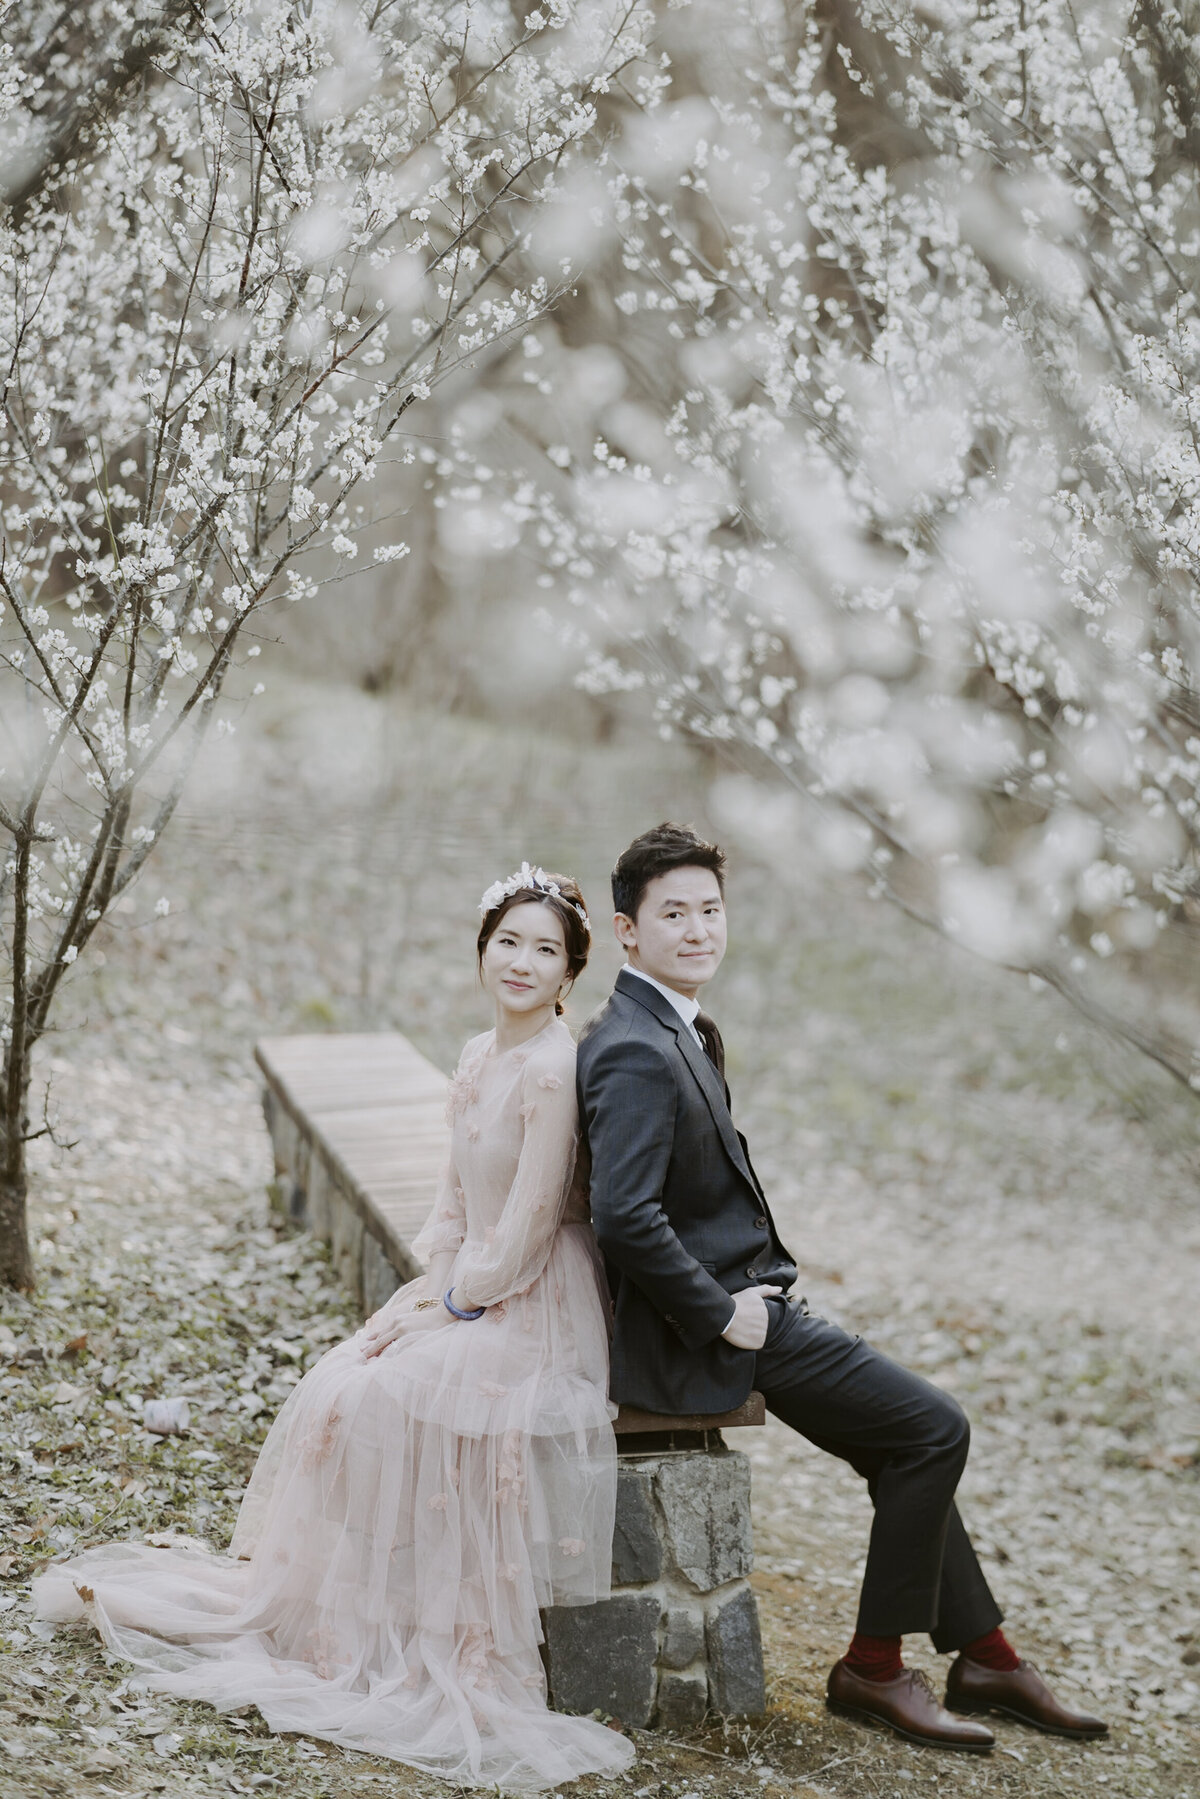 a bride wearing a pink dress and a groom wearing a navy blue suit sit under the cherry blossoms